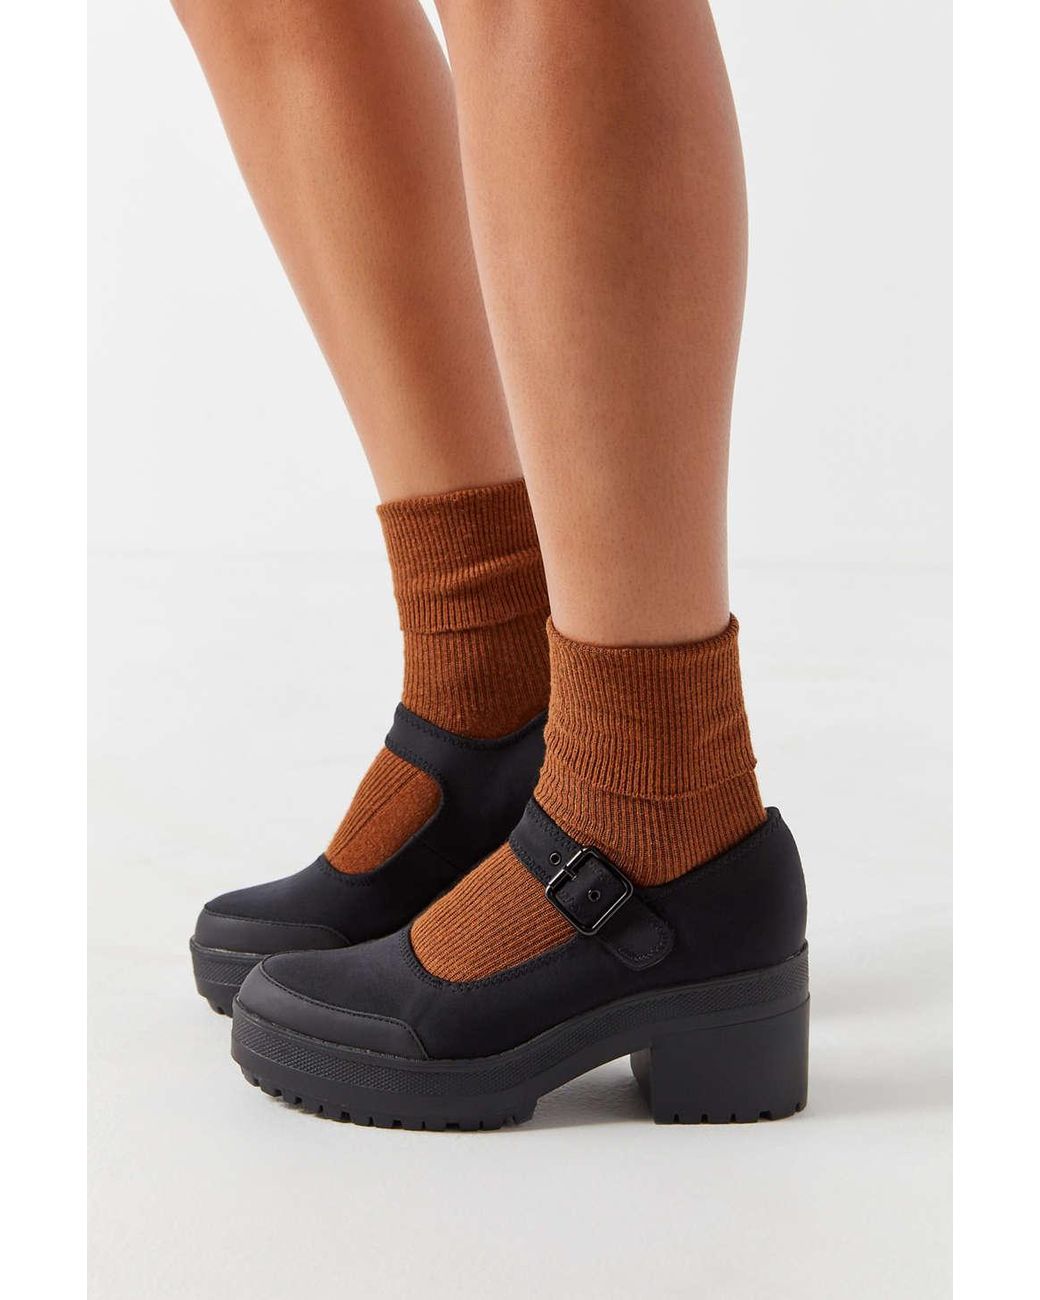 Urban Outfitters Uo Paige T-Strap Mary Jane Shoe Shoe in Black, Women's at Urban Outfitters